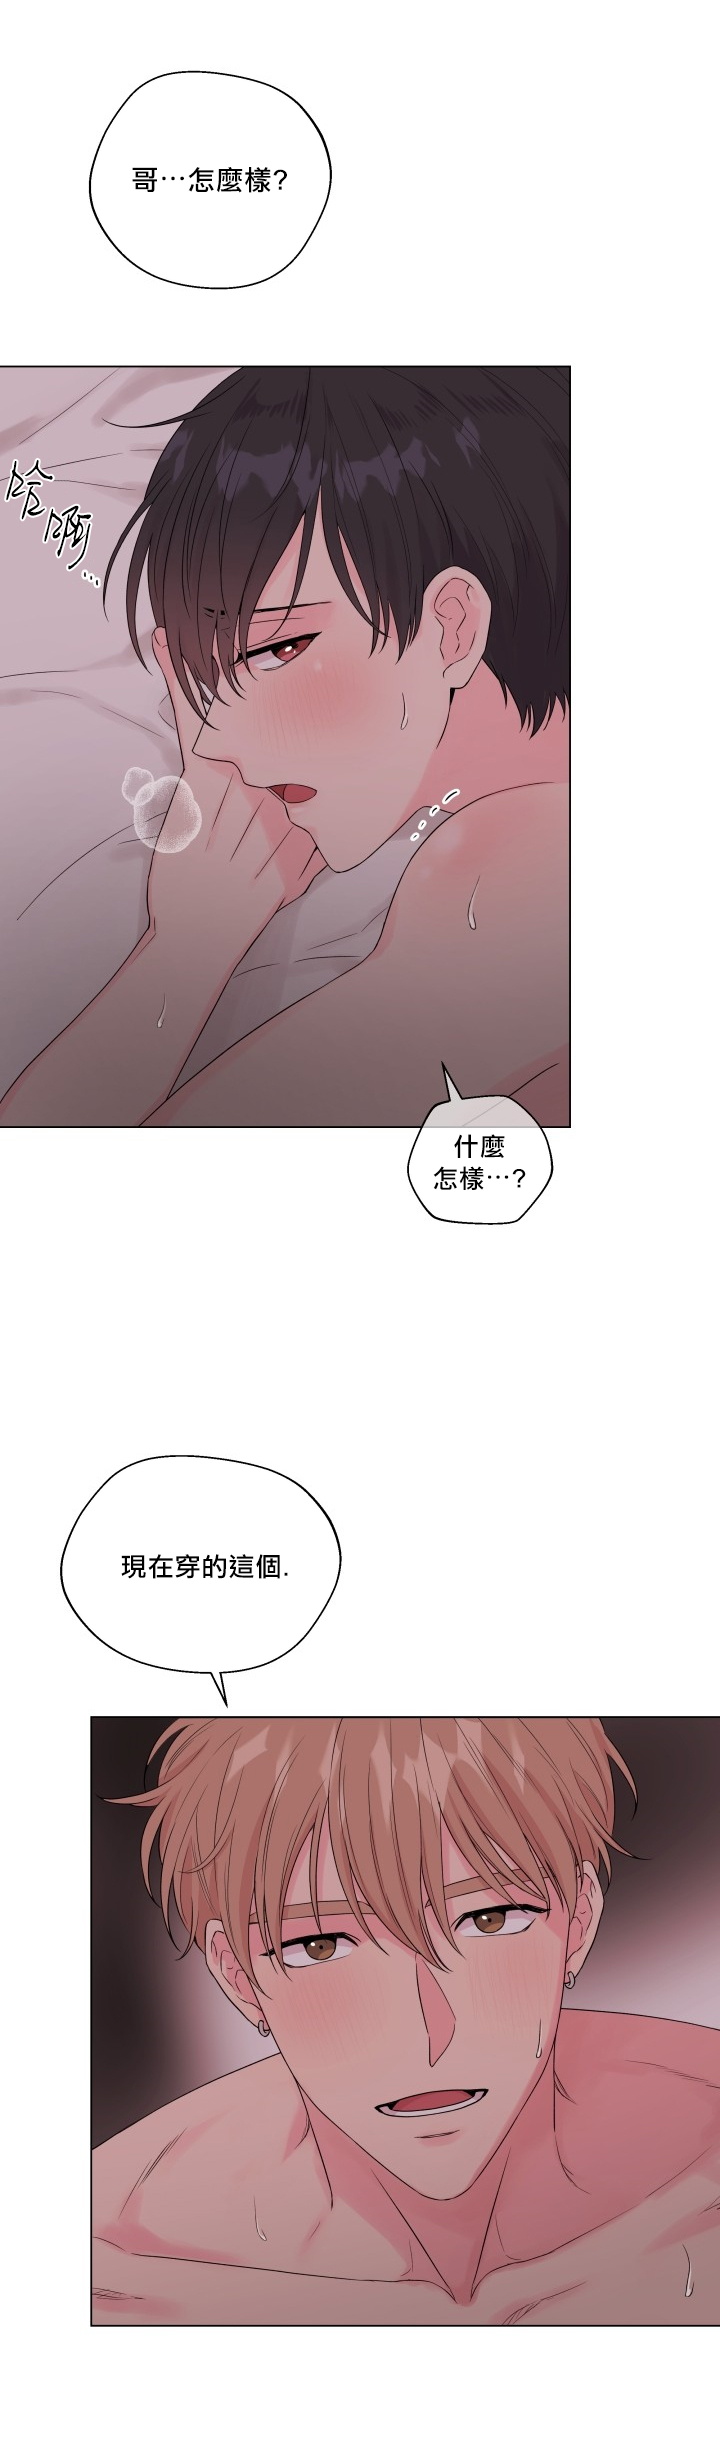 [Yuje] 奇妙玩具来袭 Peach, Pitch Tail 01 [Chinese] 피치, 핏치 테일